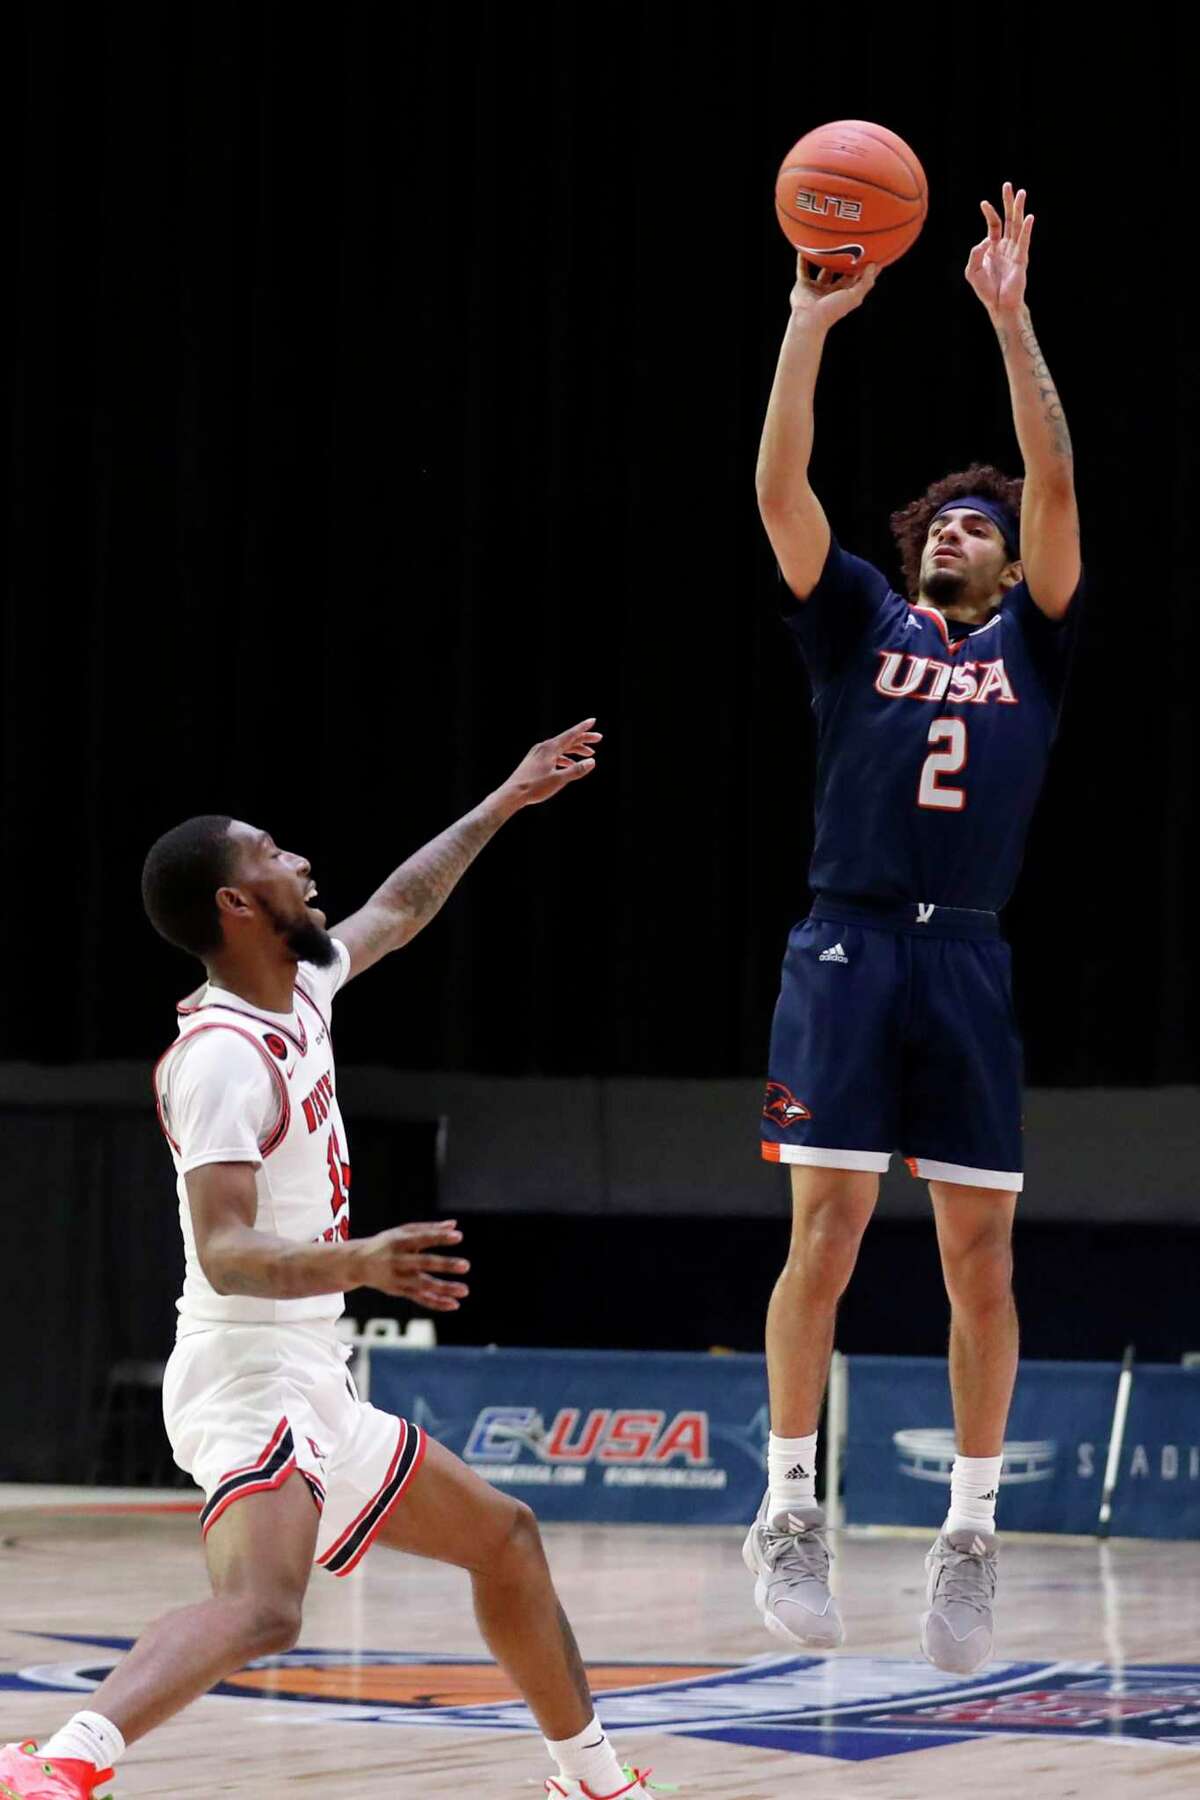 UTSA loses to Western Kentucky in Conference USA tournament